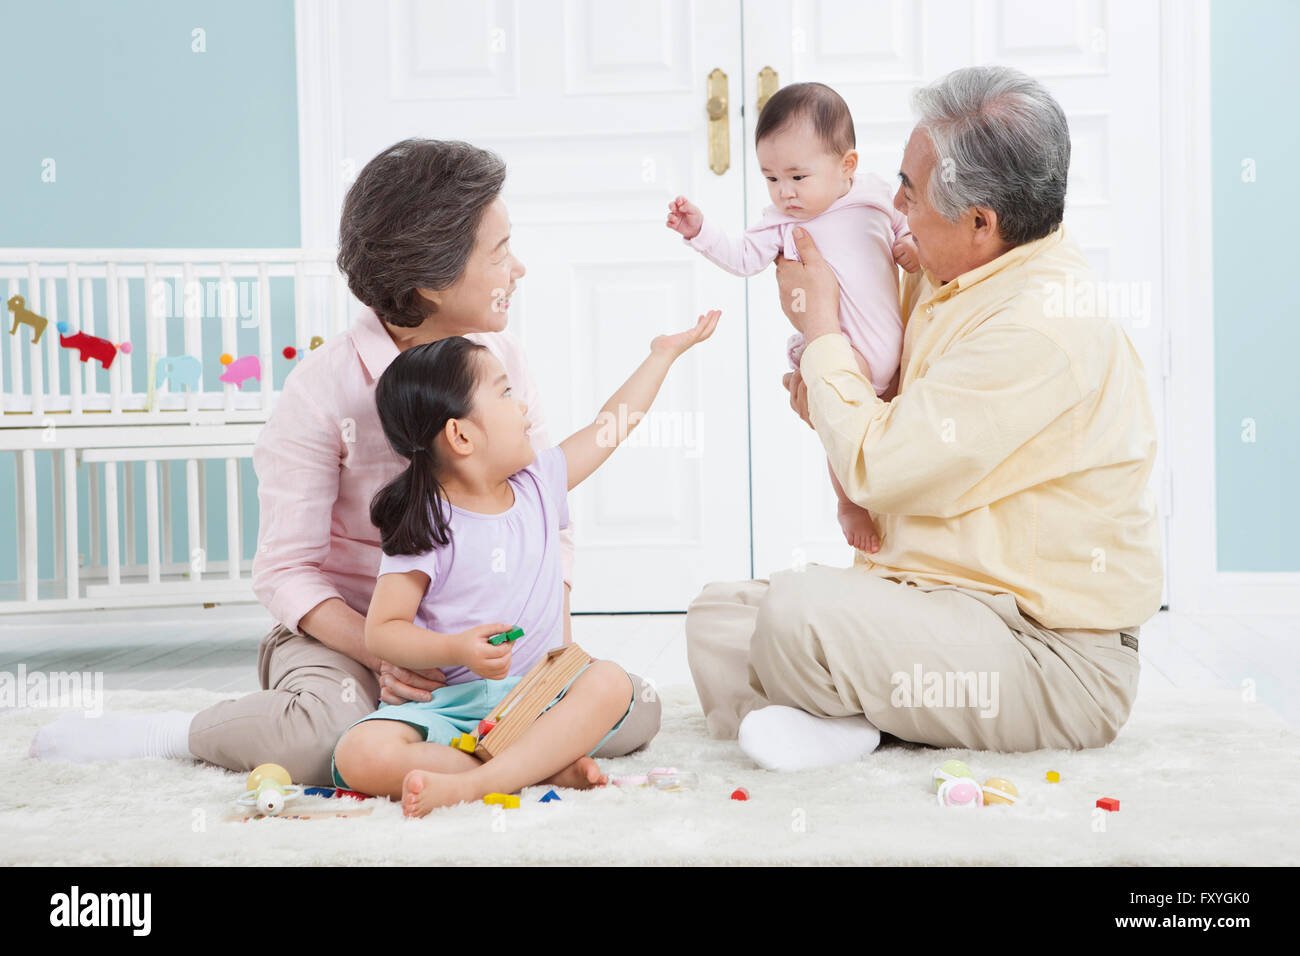 Grandfather holding a baby and grandmother and granddaughter looking at the baby all seated on the floor Stock Photo